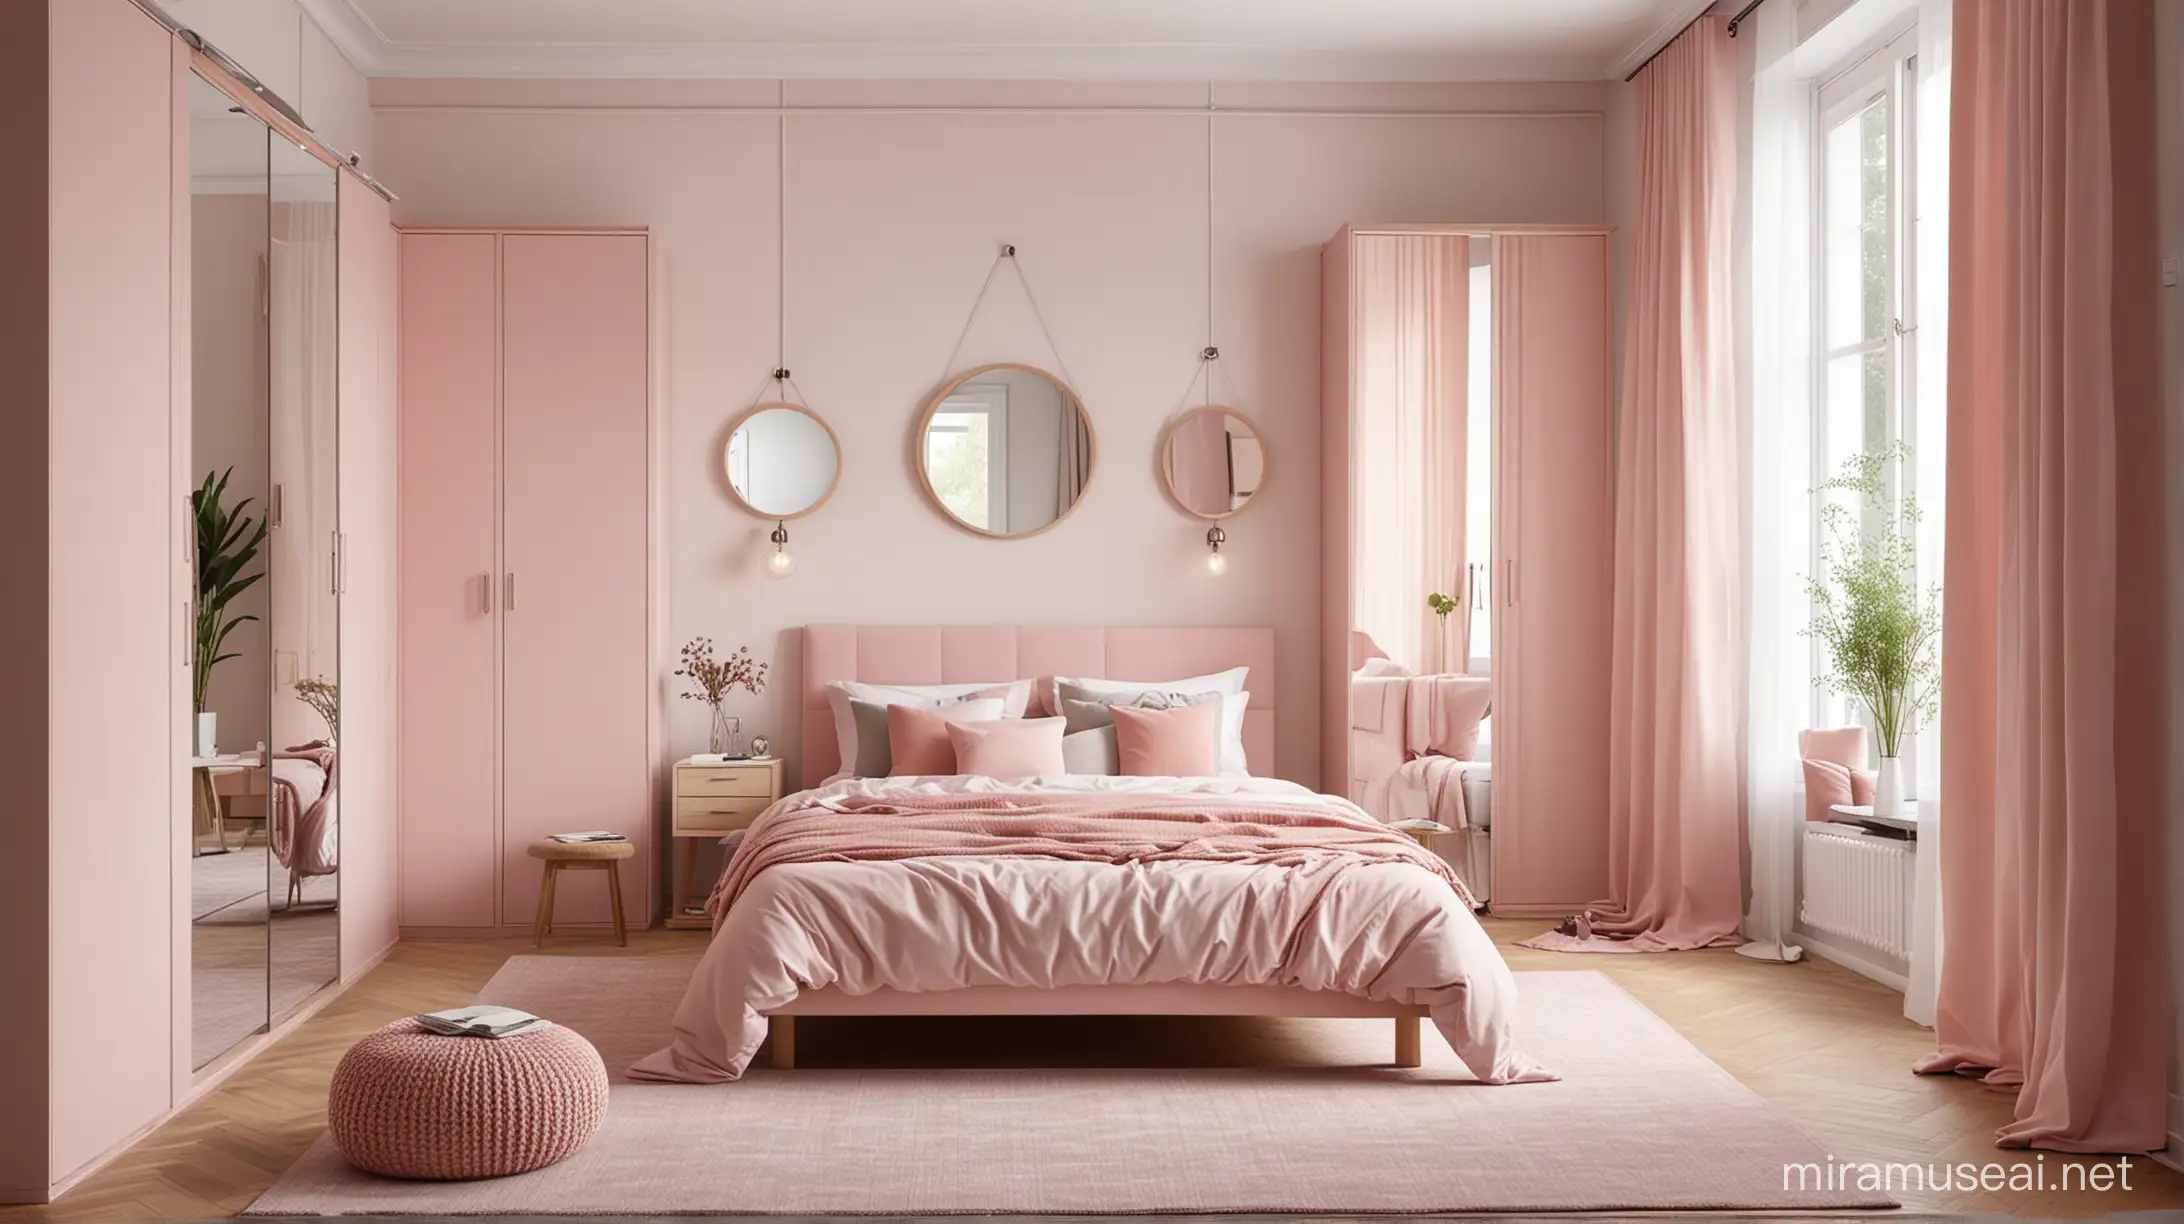 Bedroom interior with a pink bed, a two-door white glass wardrobe with metal inserts, three identical parts, parquet flooring, a chest of drawers, a dressing table, a window with a curtain, a pouf, a mirror, a wardrobe on two sides of the bed. a soft blanket and several pillows on the bed.
Place a rug on the floor next to the bed.
Place some decorative items on the dresser, such as a vase of flowers or a photo frame.
Put a throw blanket on the pouf. Lighting: Natural light from the window,Warm and cozy atmosphere.
Color Palette:Pink,White,Gray,Wood tones.Style:Modern,Minimalist,With a touch of bohemians. Makeure the room is tidy and cozy.